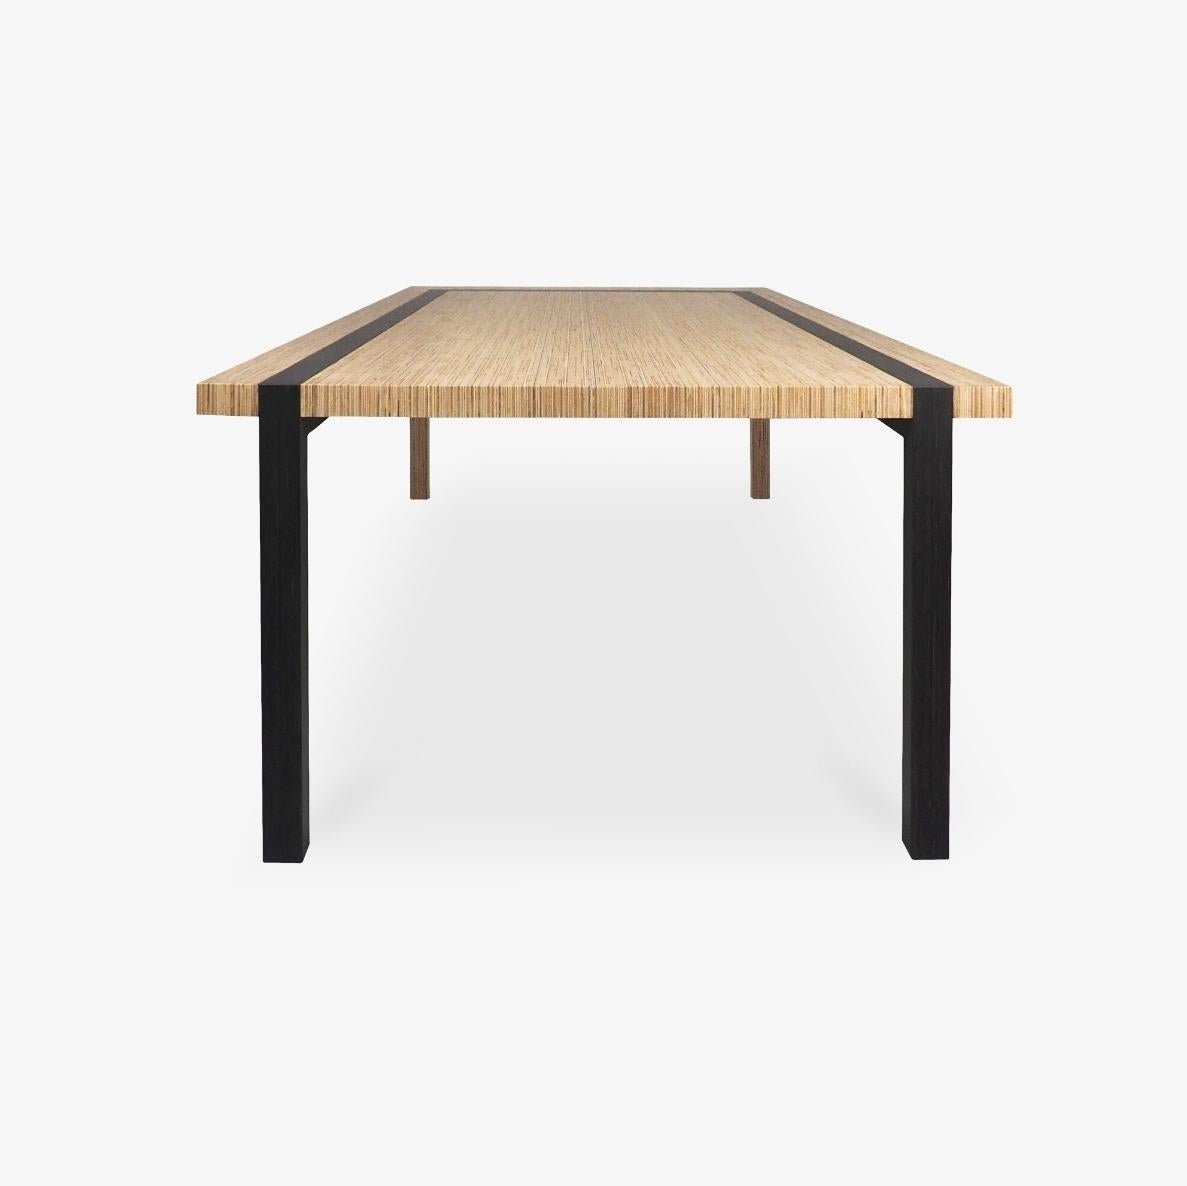 Birch Scandinavian Designer Natural Wood Small Size Dining Table For Sale